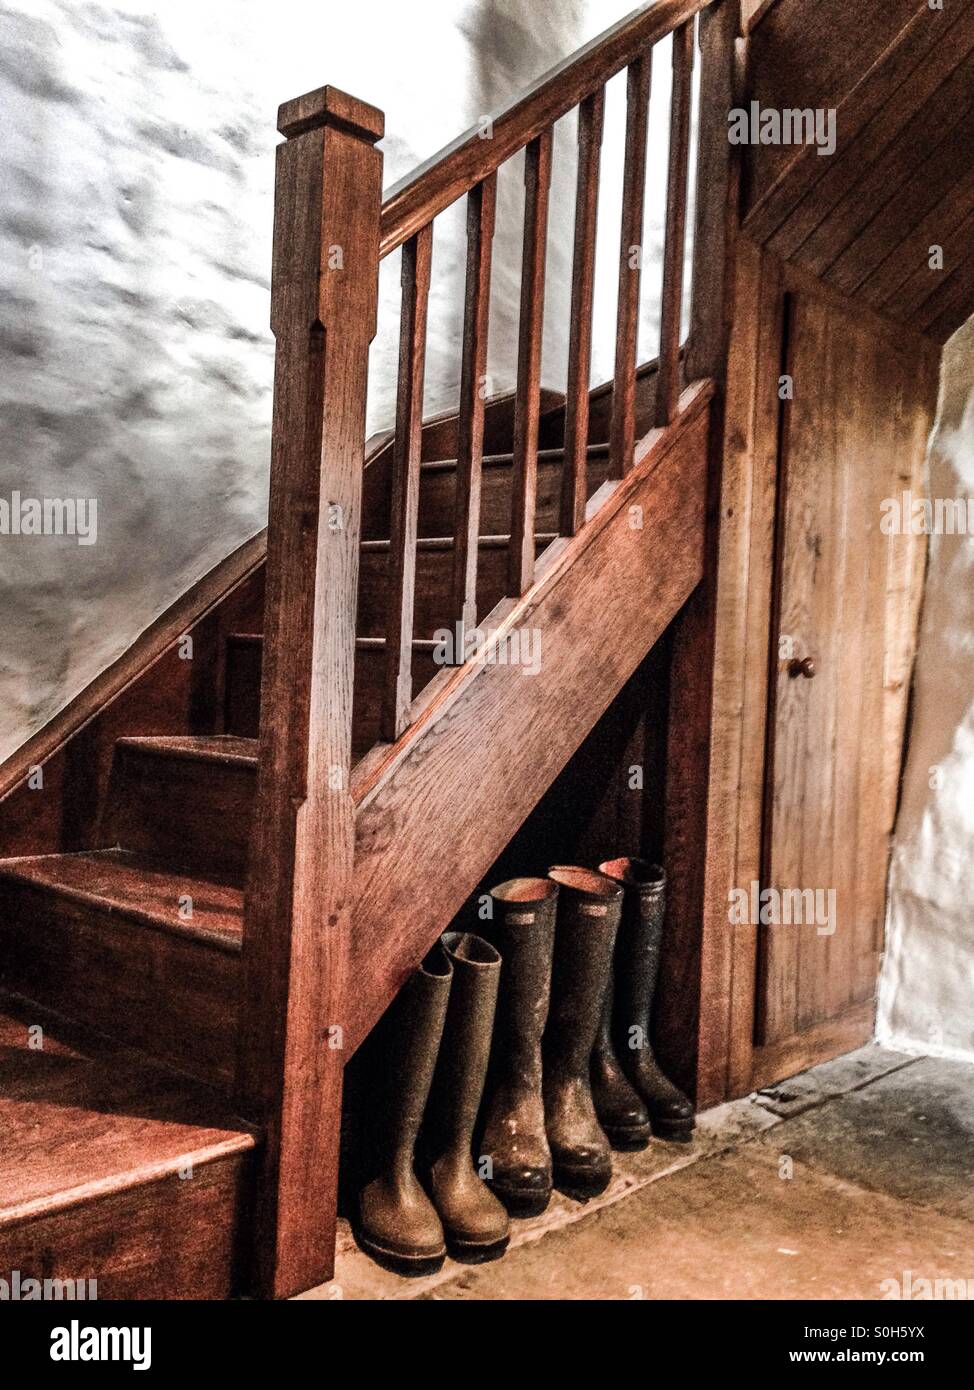 Our wellingtons sitting snugly at the farmhouse in Wales. Stock Photo